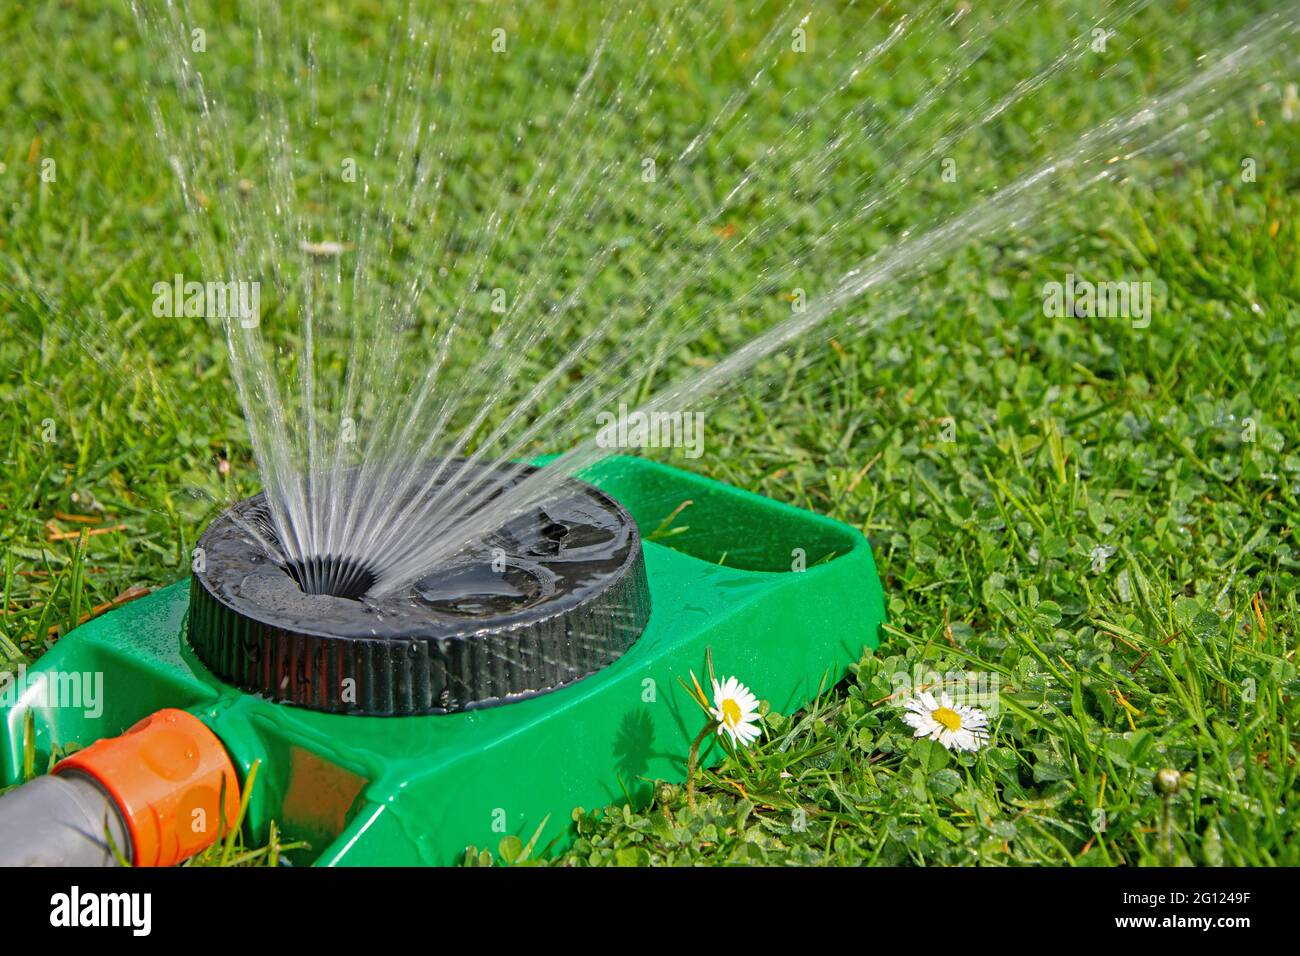 Lawn sprinkler irrigates a meadow Stock Photo